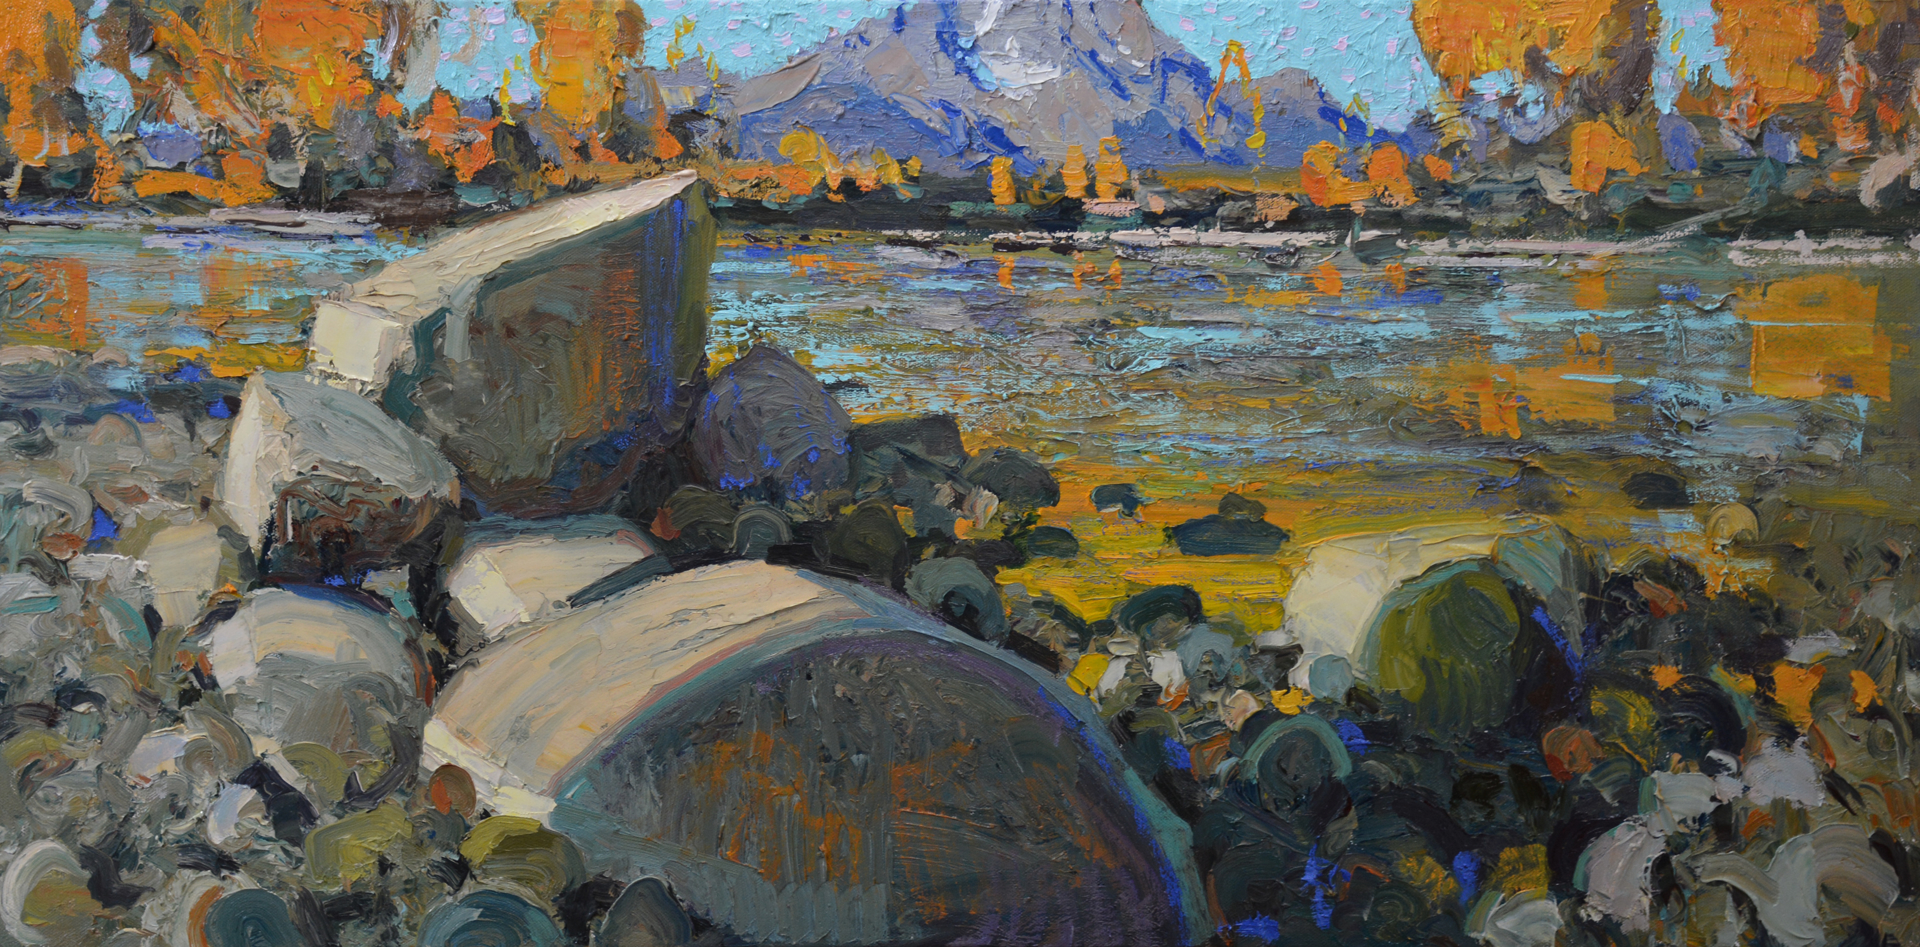 A Contemporary Fine Art Oil Painting By Silas Thompson Featuring Mount Moran And The River's Edge , Available At Gallery Wild